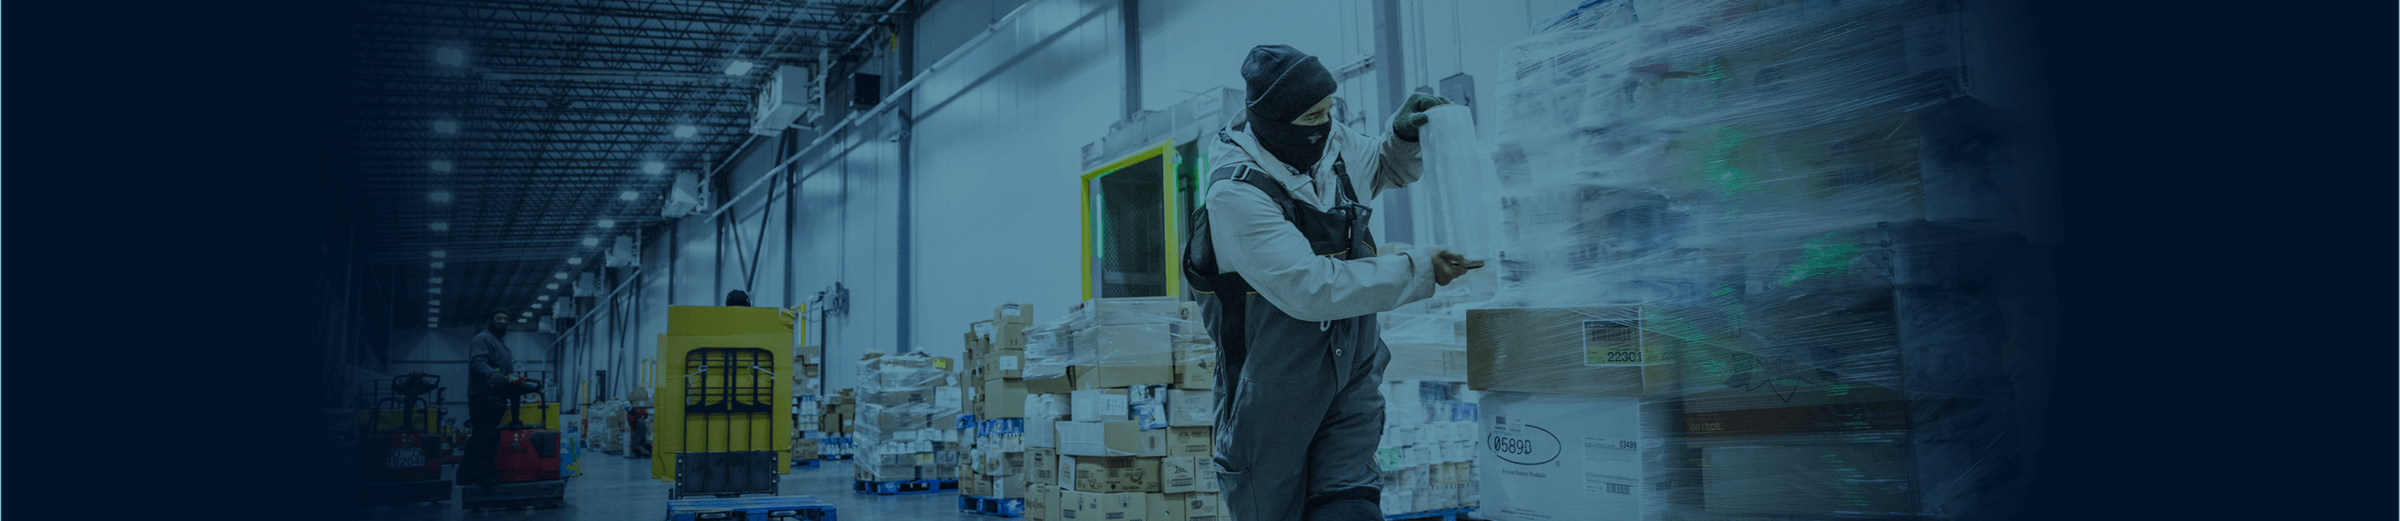 A worker in a warehouse, wearing a mask and winter cap, moves a product.